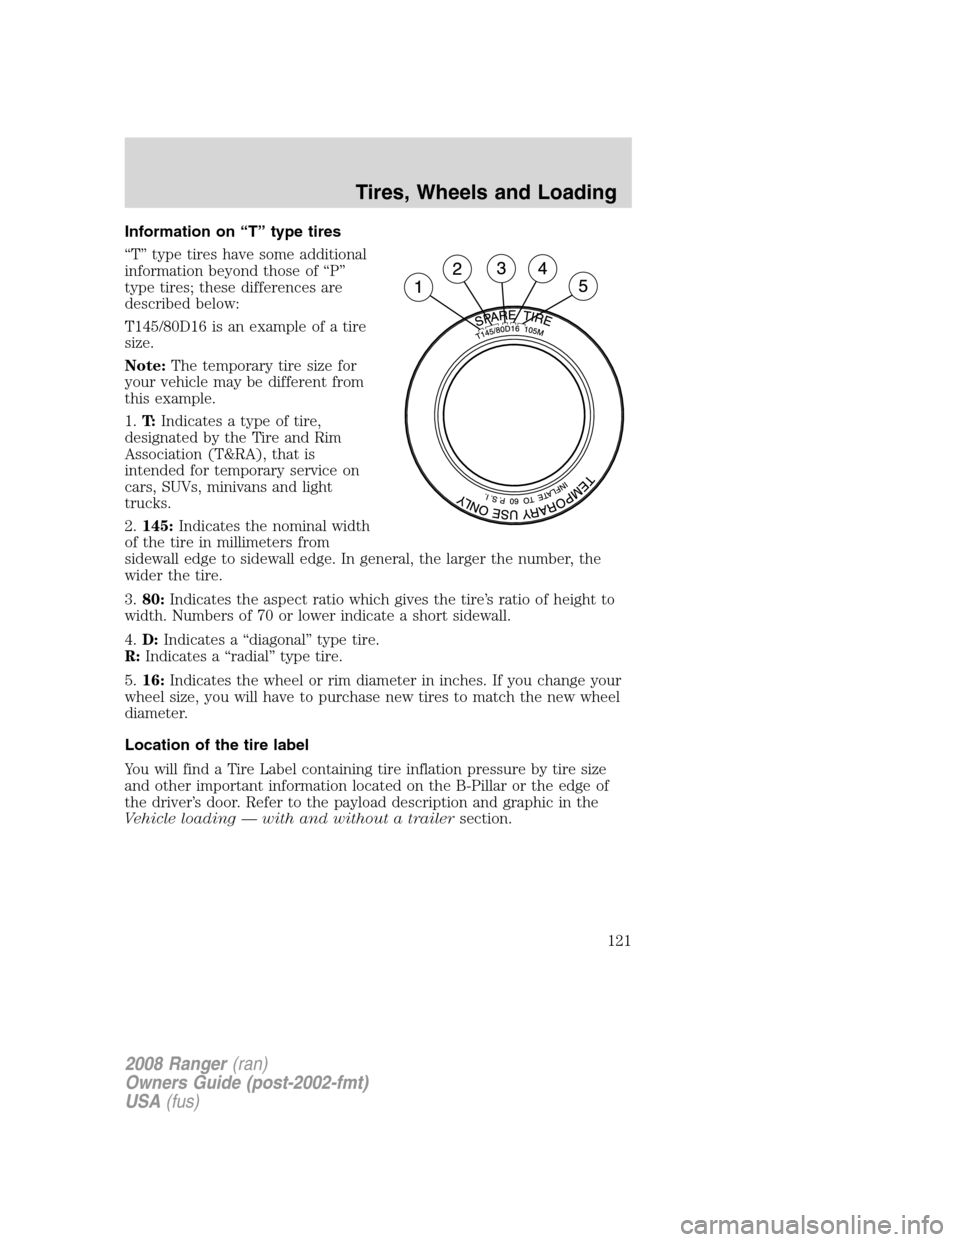 FORD RANGER 2008 2.G Owners Manual Information on “T” type tires
“T” type tires have some additional
information beyond those of “P”
type tires; these differences are
described below:
T145/80D16 is an example of a tire
size